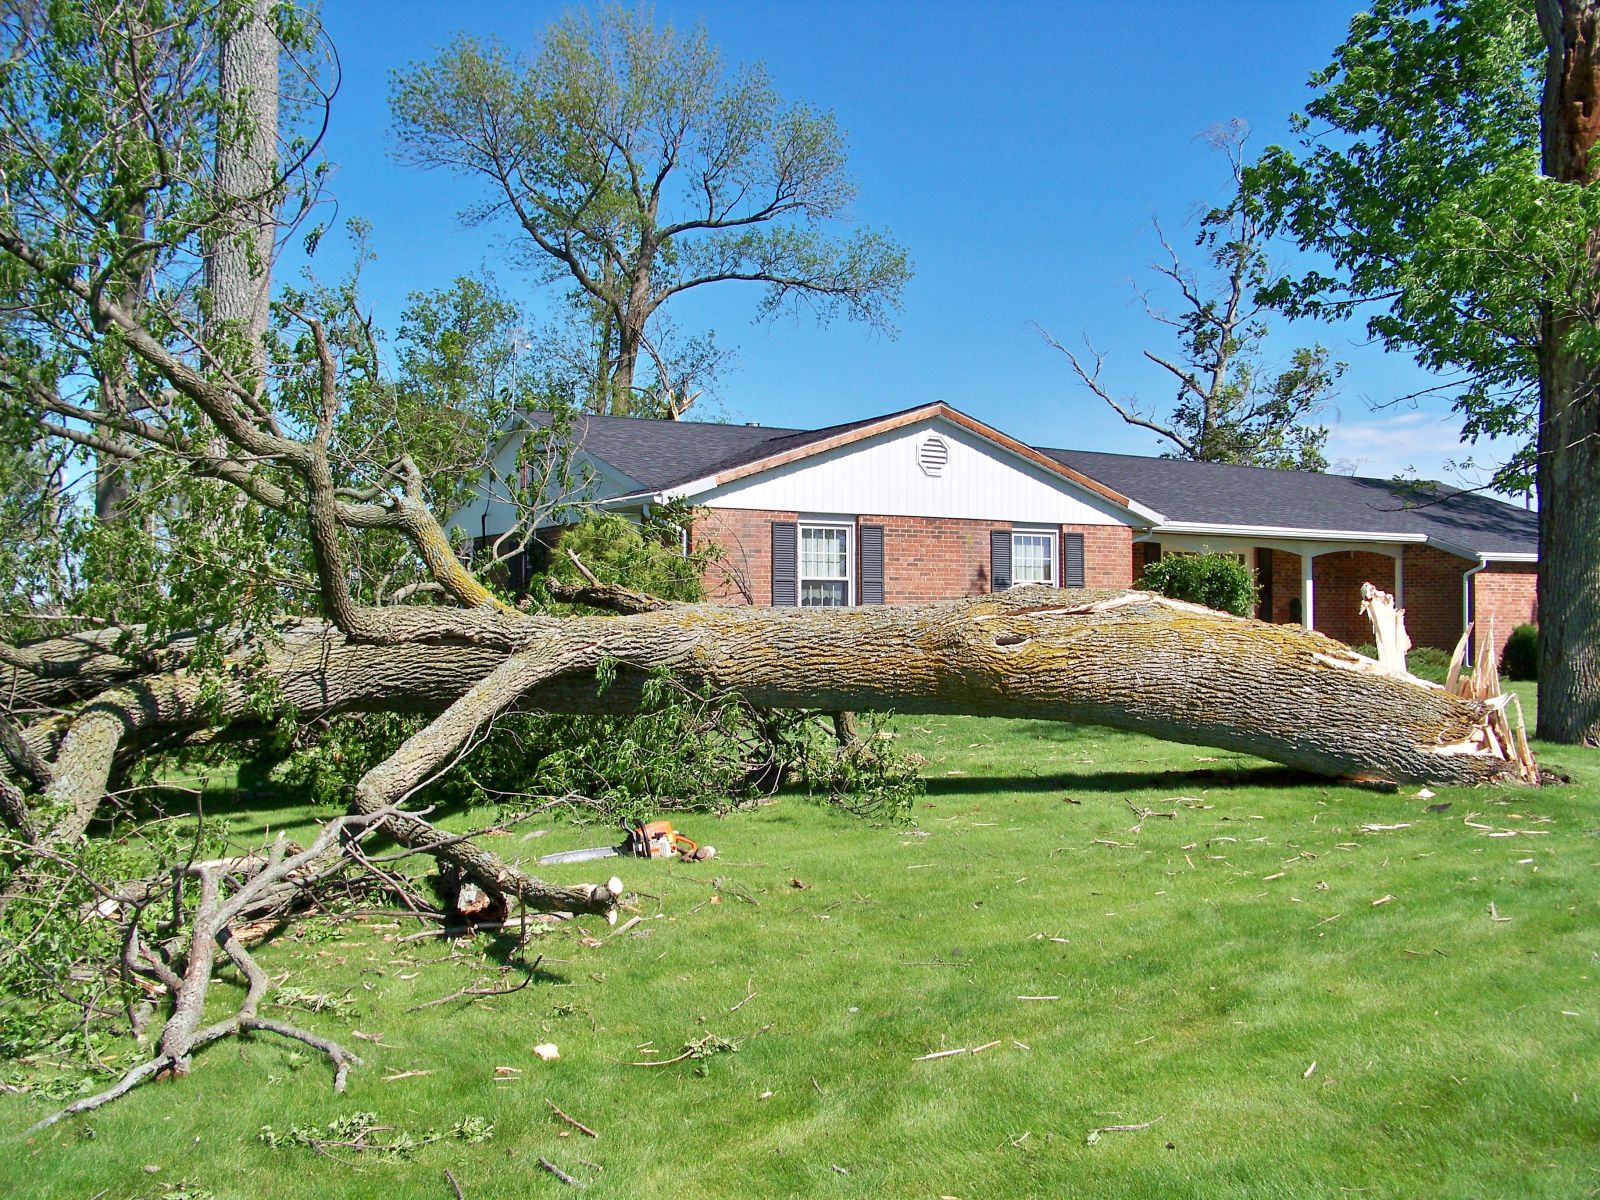 Large tree with trunk snapped near base.